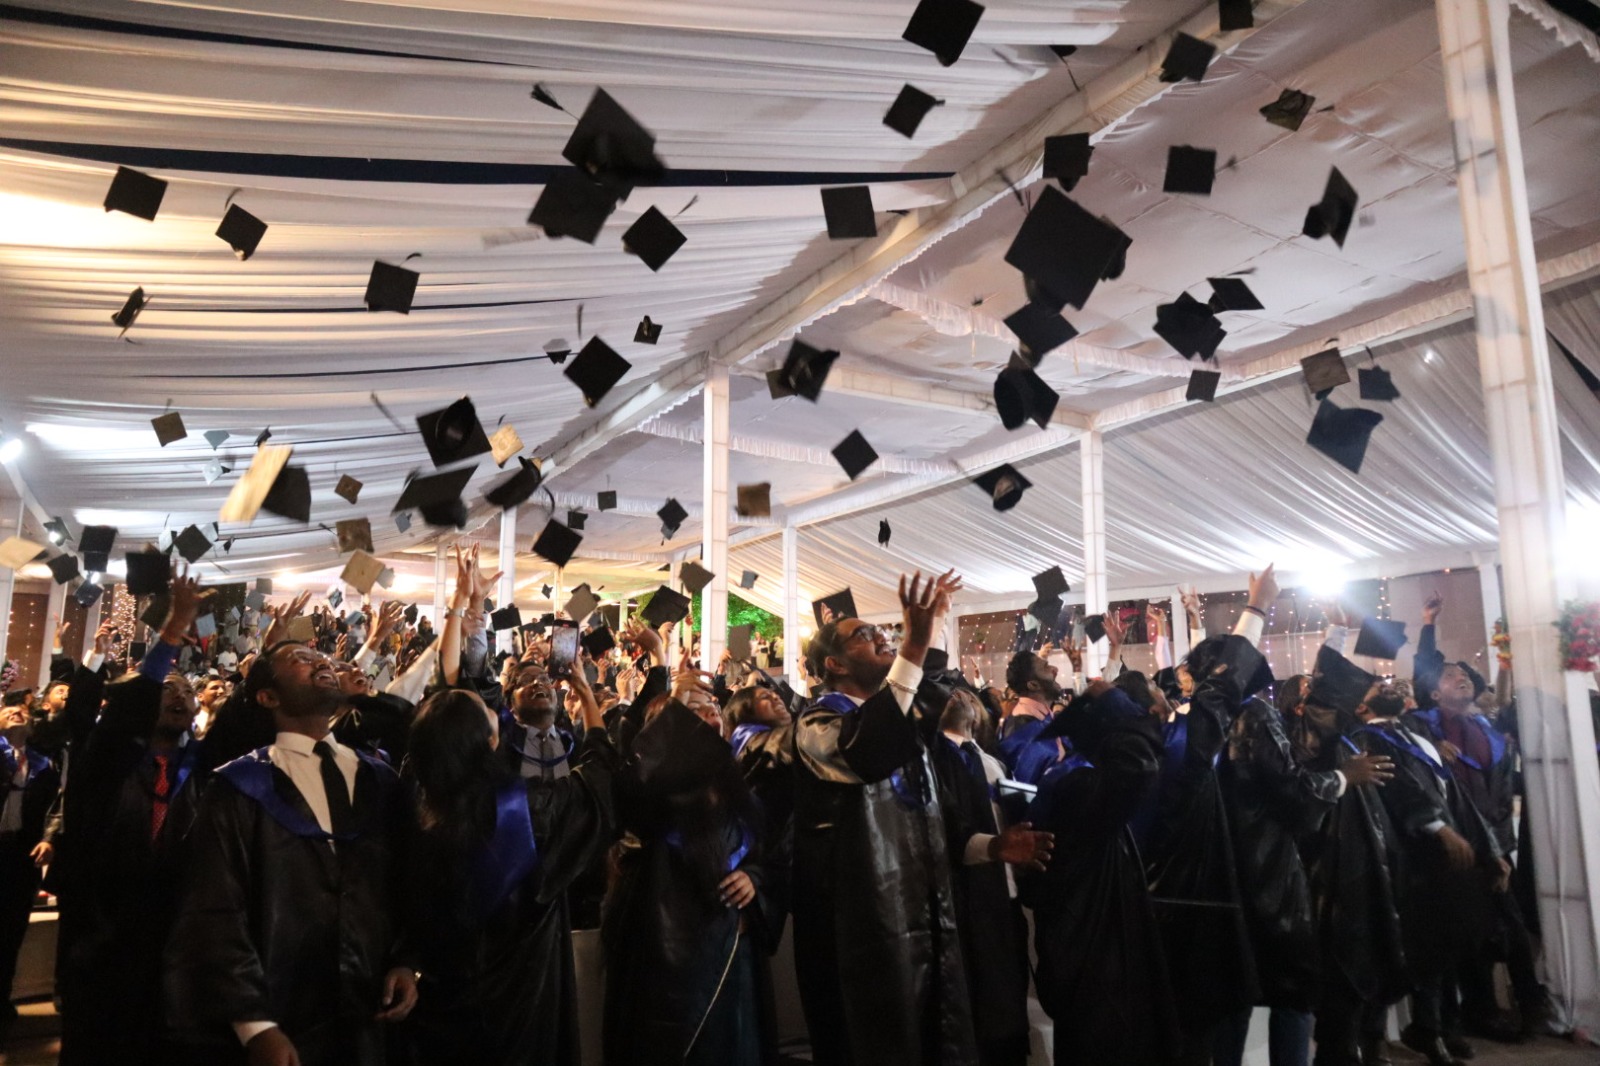 iim-udaipur-awards-mba-degrees-to-398-students-at-its-11th-annual-convocation